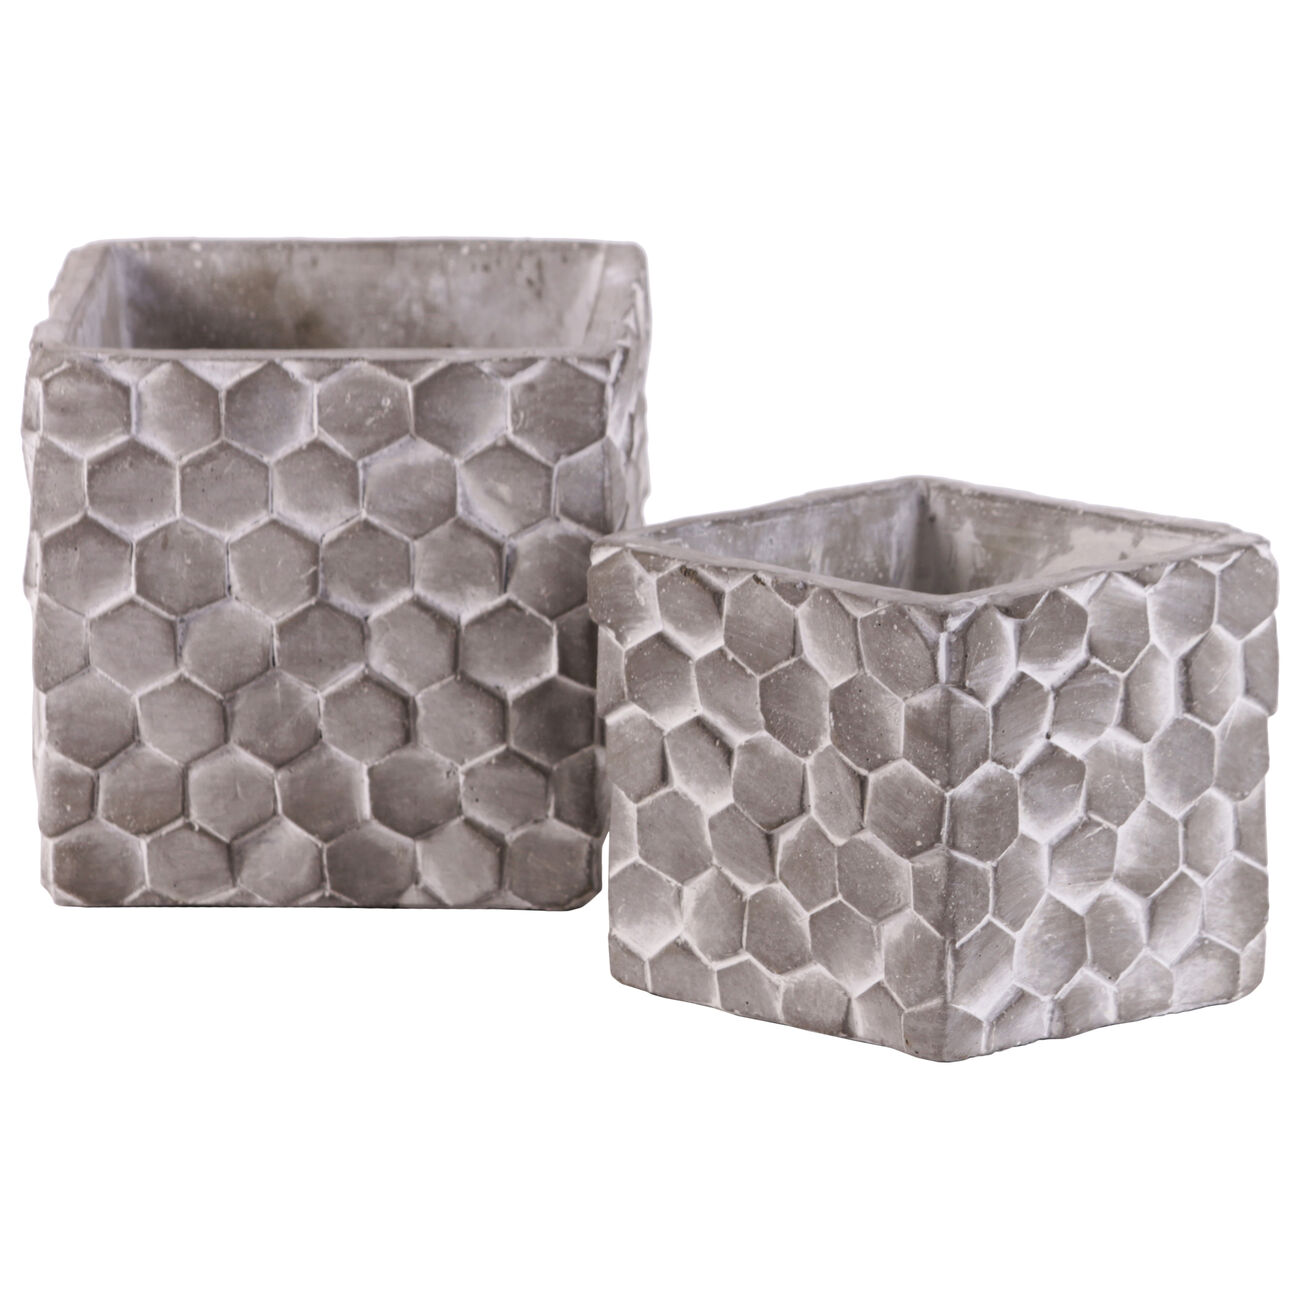 Square Cement Pot with Embossed Hexagonal Design, Set of 2, Washed Gray